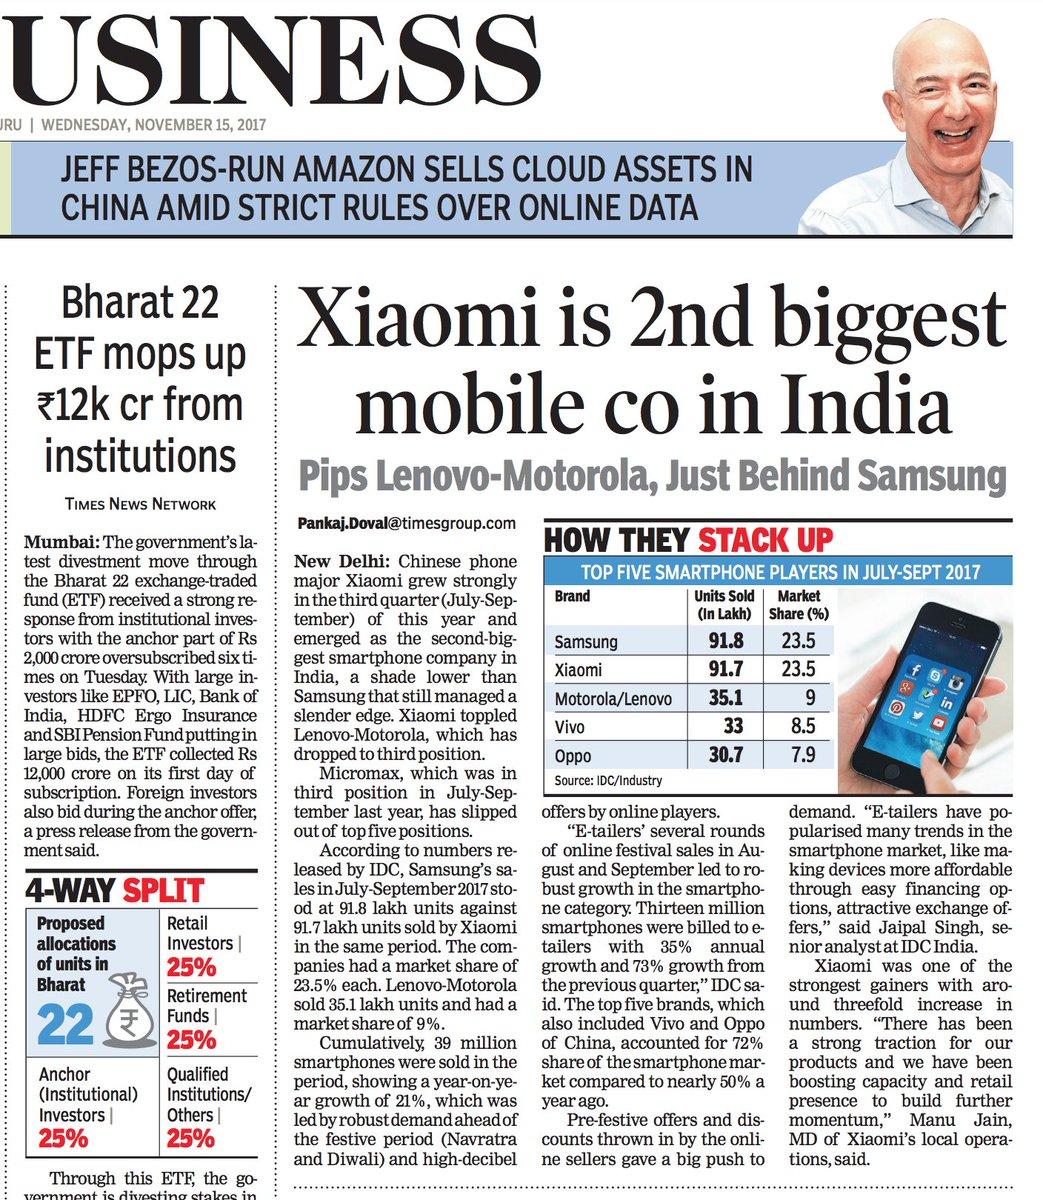 Karthik 🇮🇳 on Twitter: "A classic advertising v. PR story. Advertising,  on Page 1, screams 'we're no.1', while PR, on Page 23 (business page) earns  the headline that they're 2nd (I do